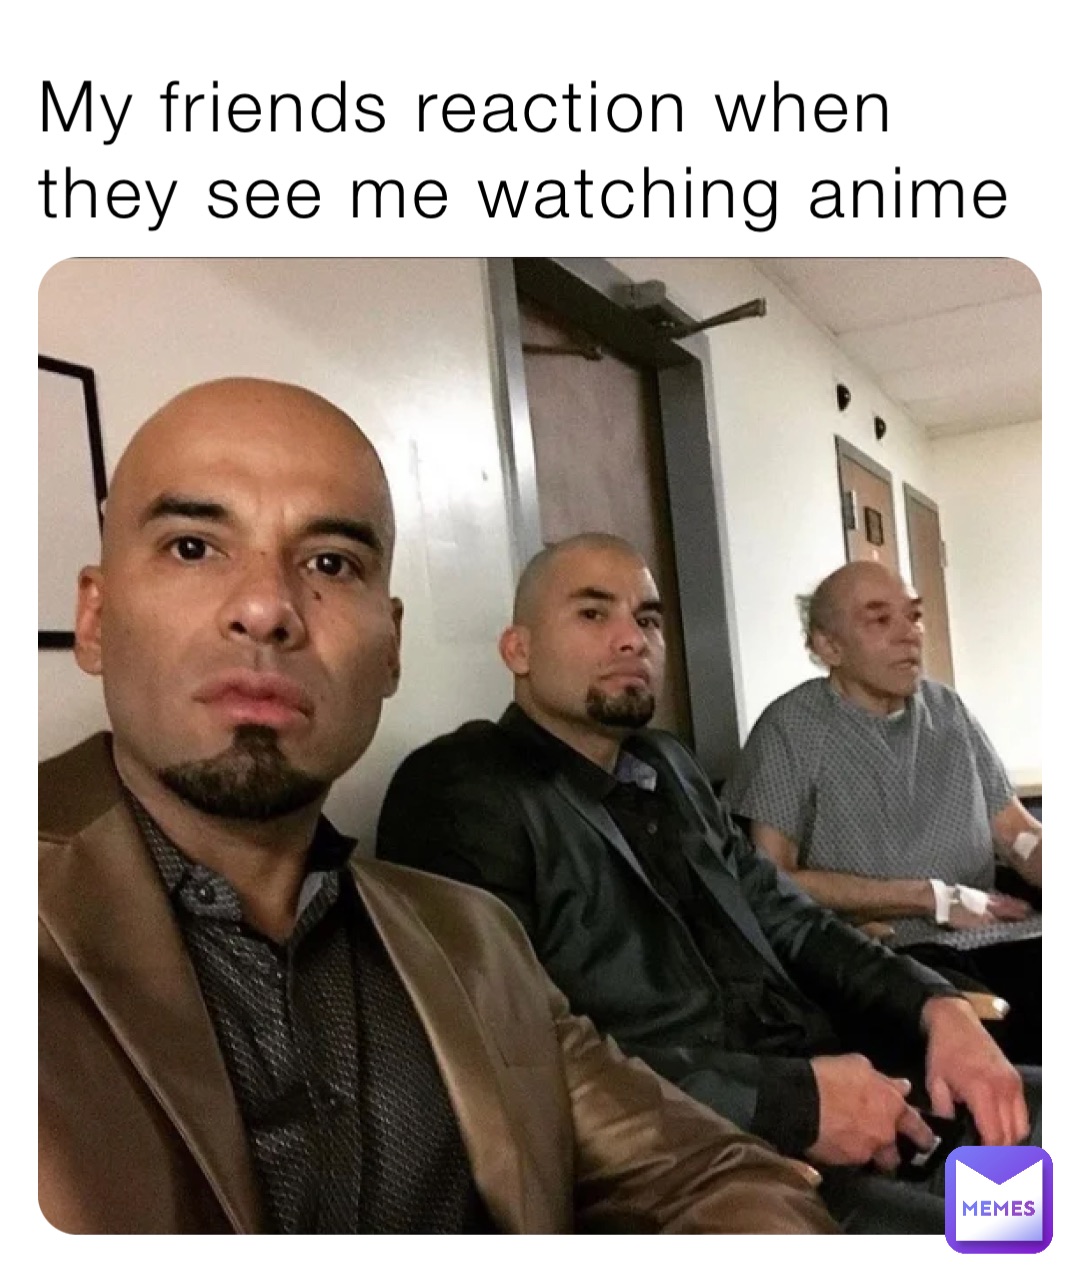 My friends reaction when they see me watching anime